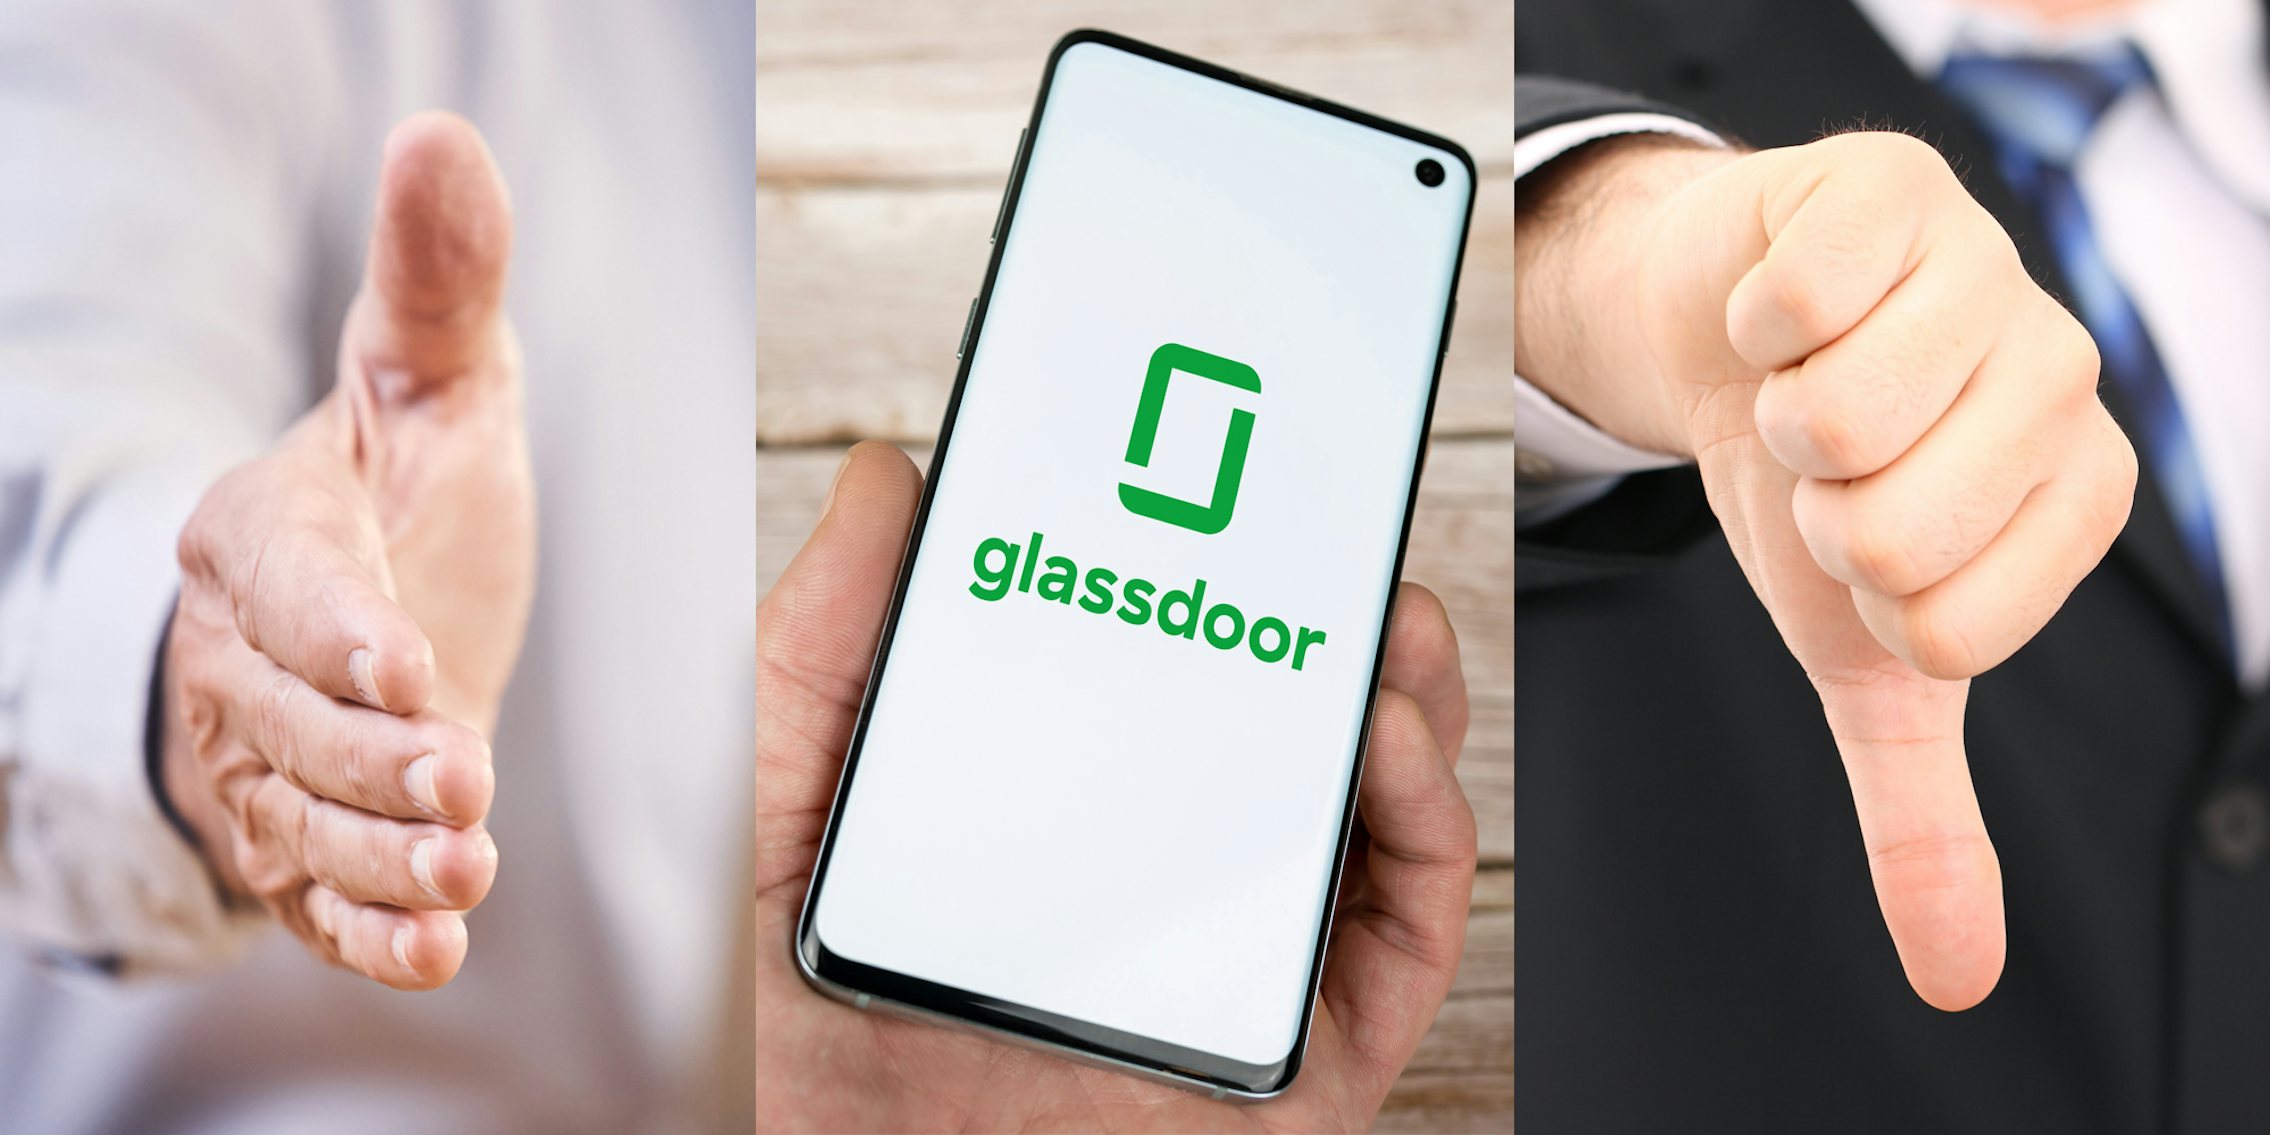 hand out (l) hand holding phone with glassdoor on screen (c) thumbs down (r)